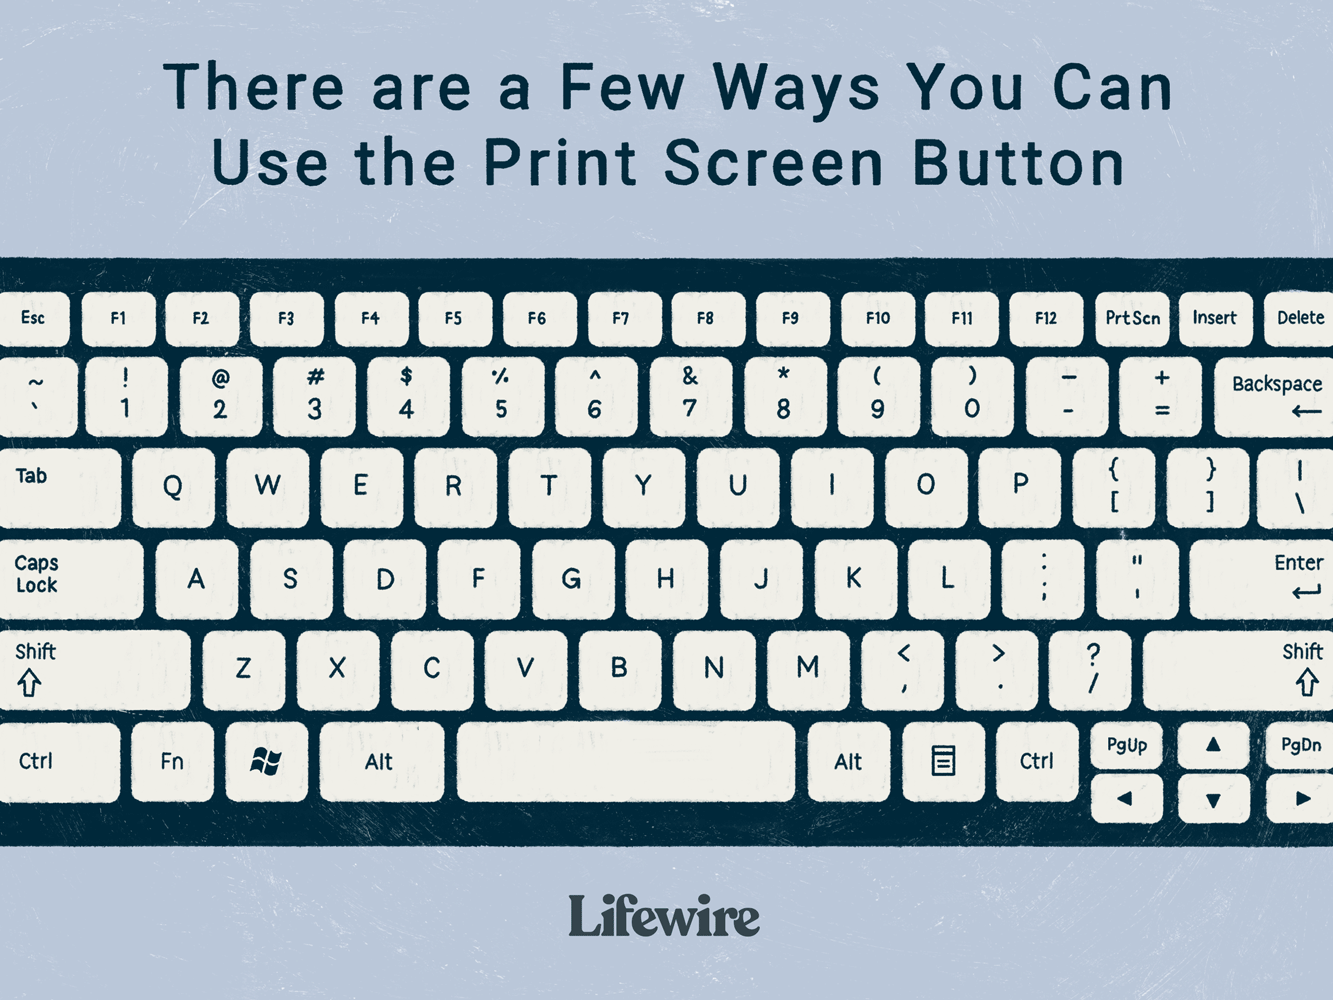 Few ways you can use Print Screen Button